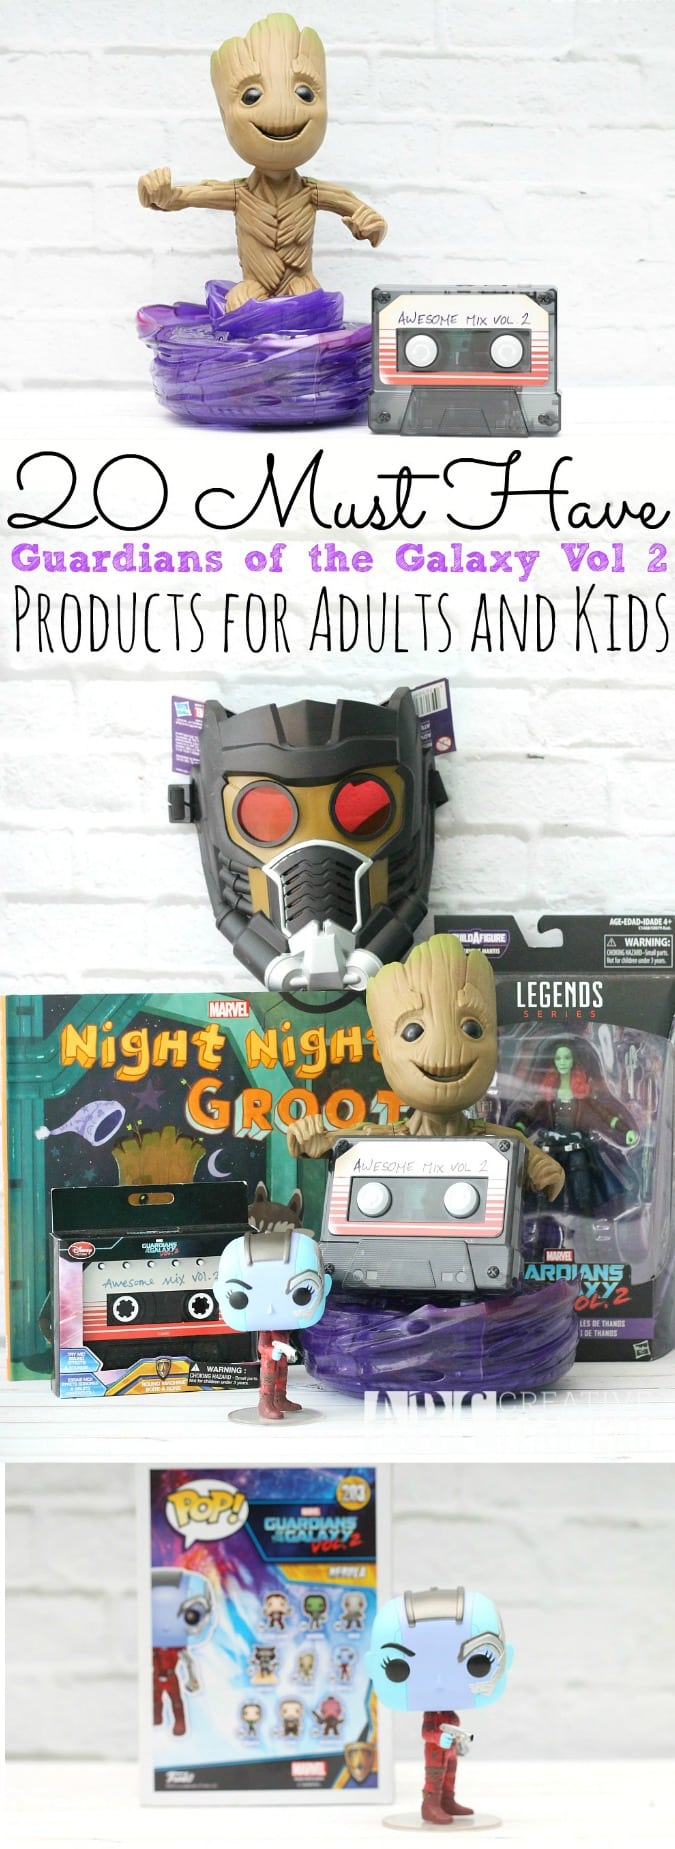 20 Must Have Guardians of the Galaxy Products Vol 2 for Adults and Kids